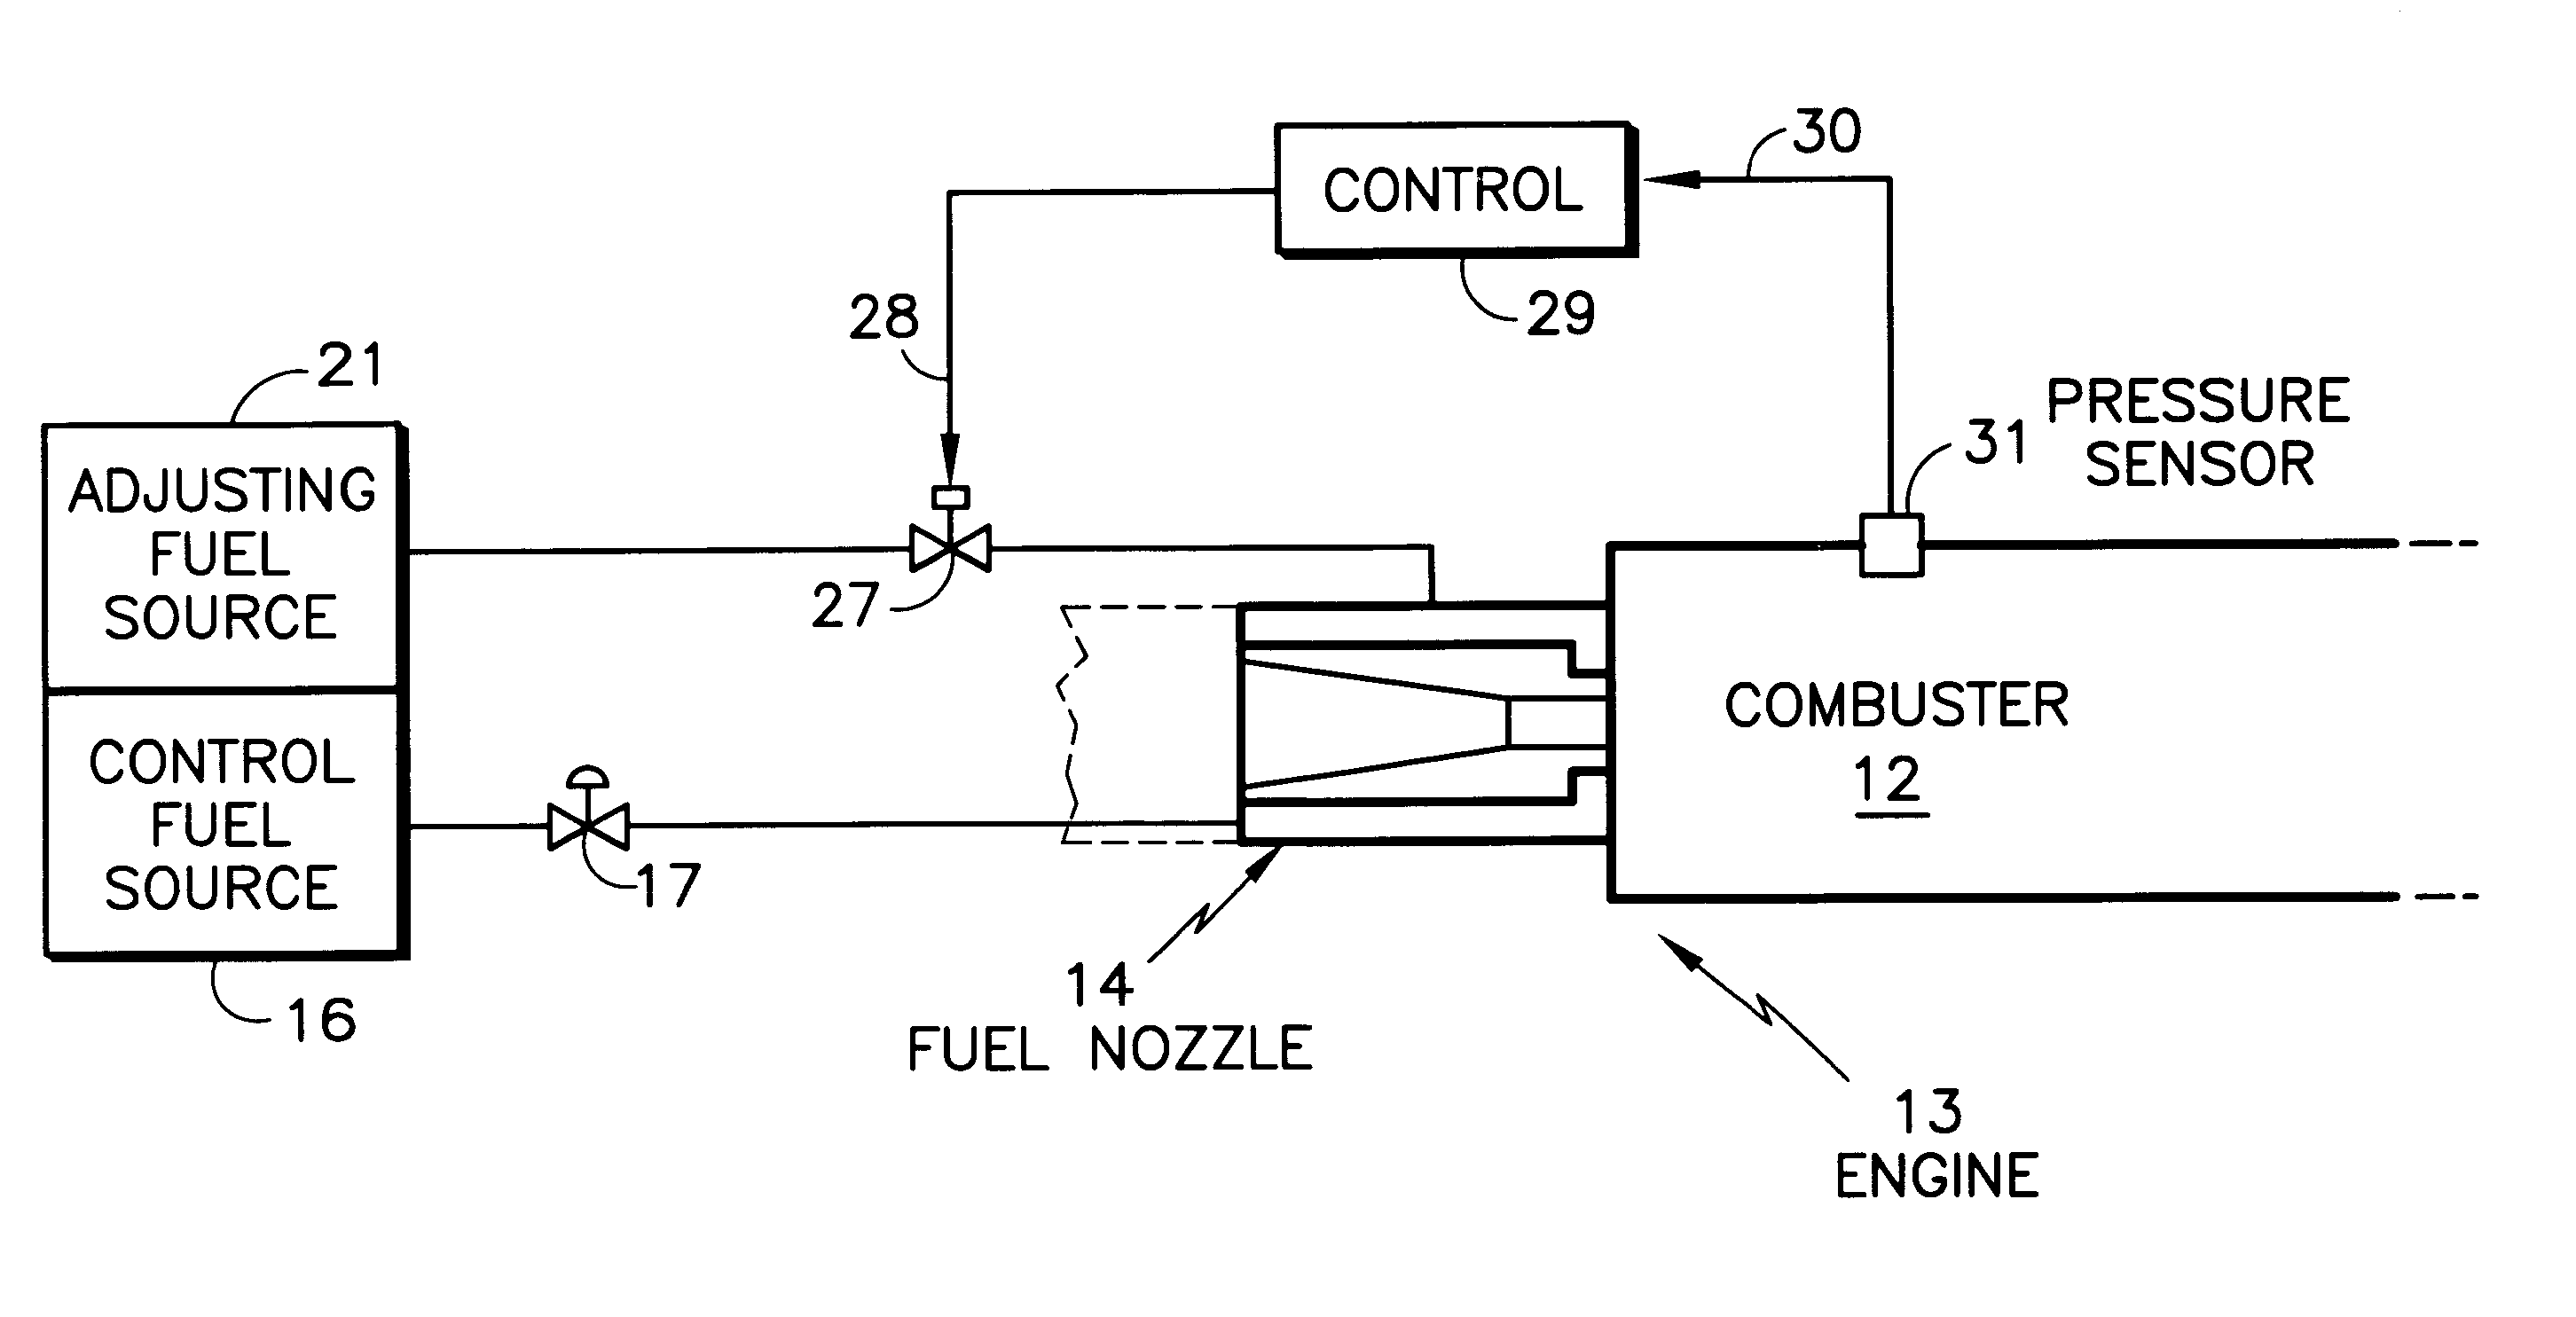 Suppressing oscillations in processes such as gas turbine combustion